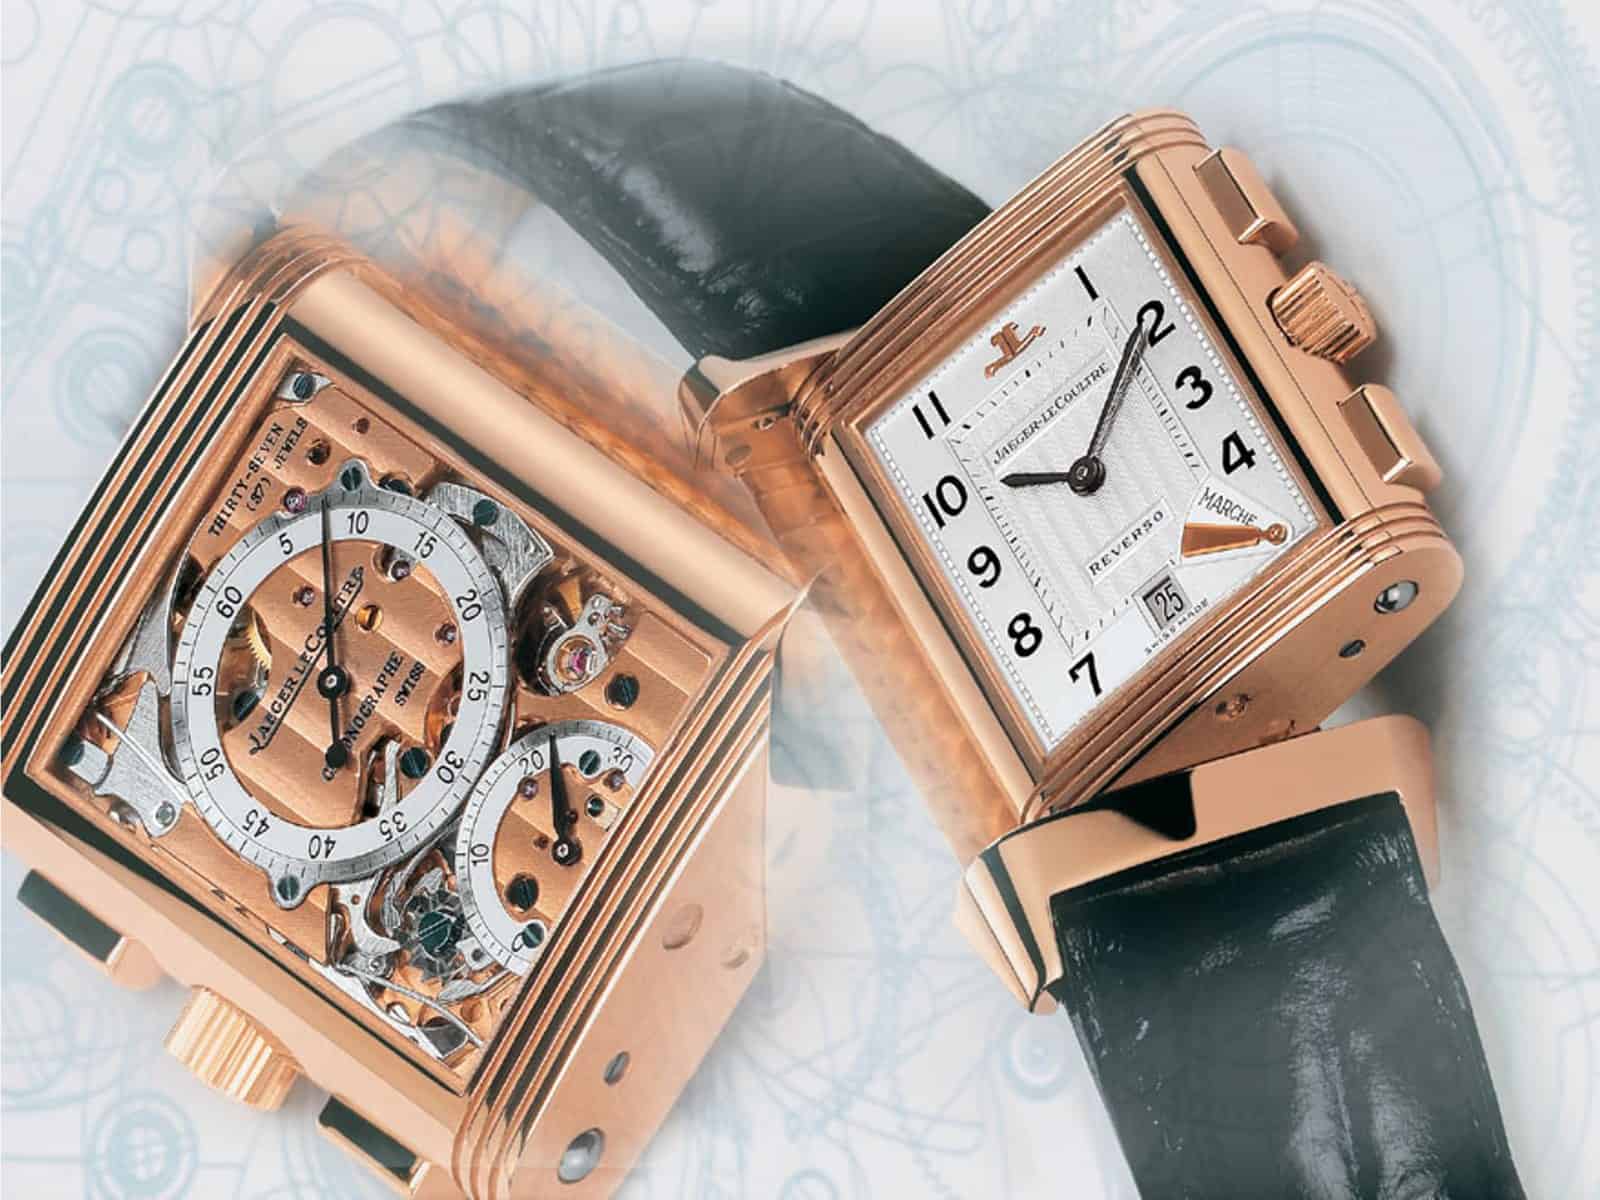 Jaeger-LeCoultre limitierter Reverso Chronograph in Rotgold, vorgestellt 1996